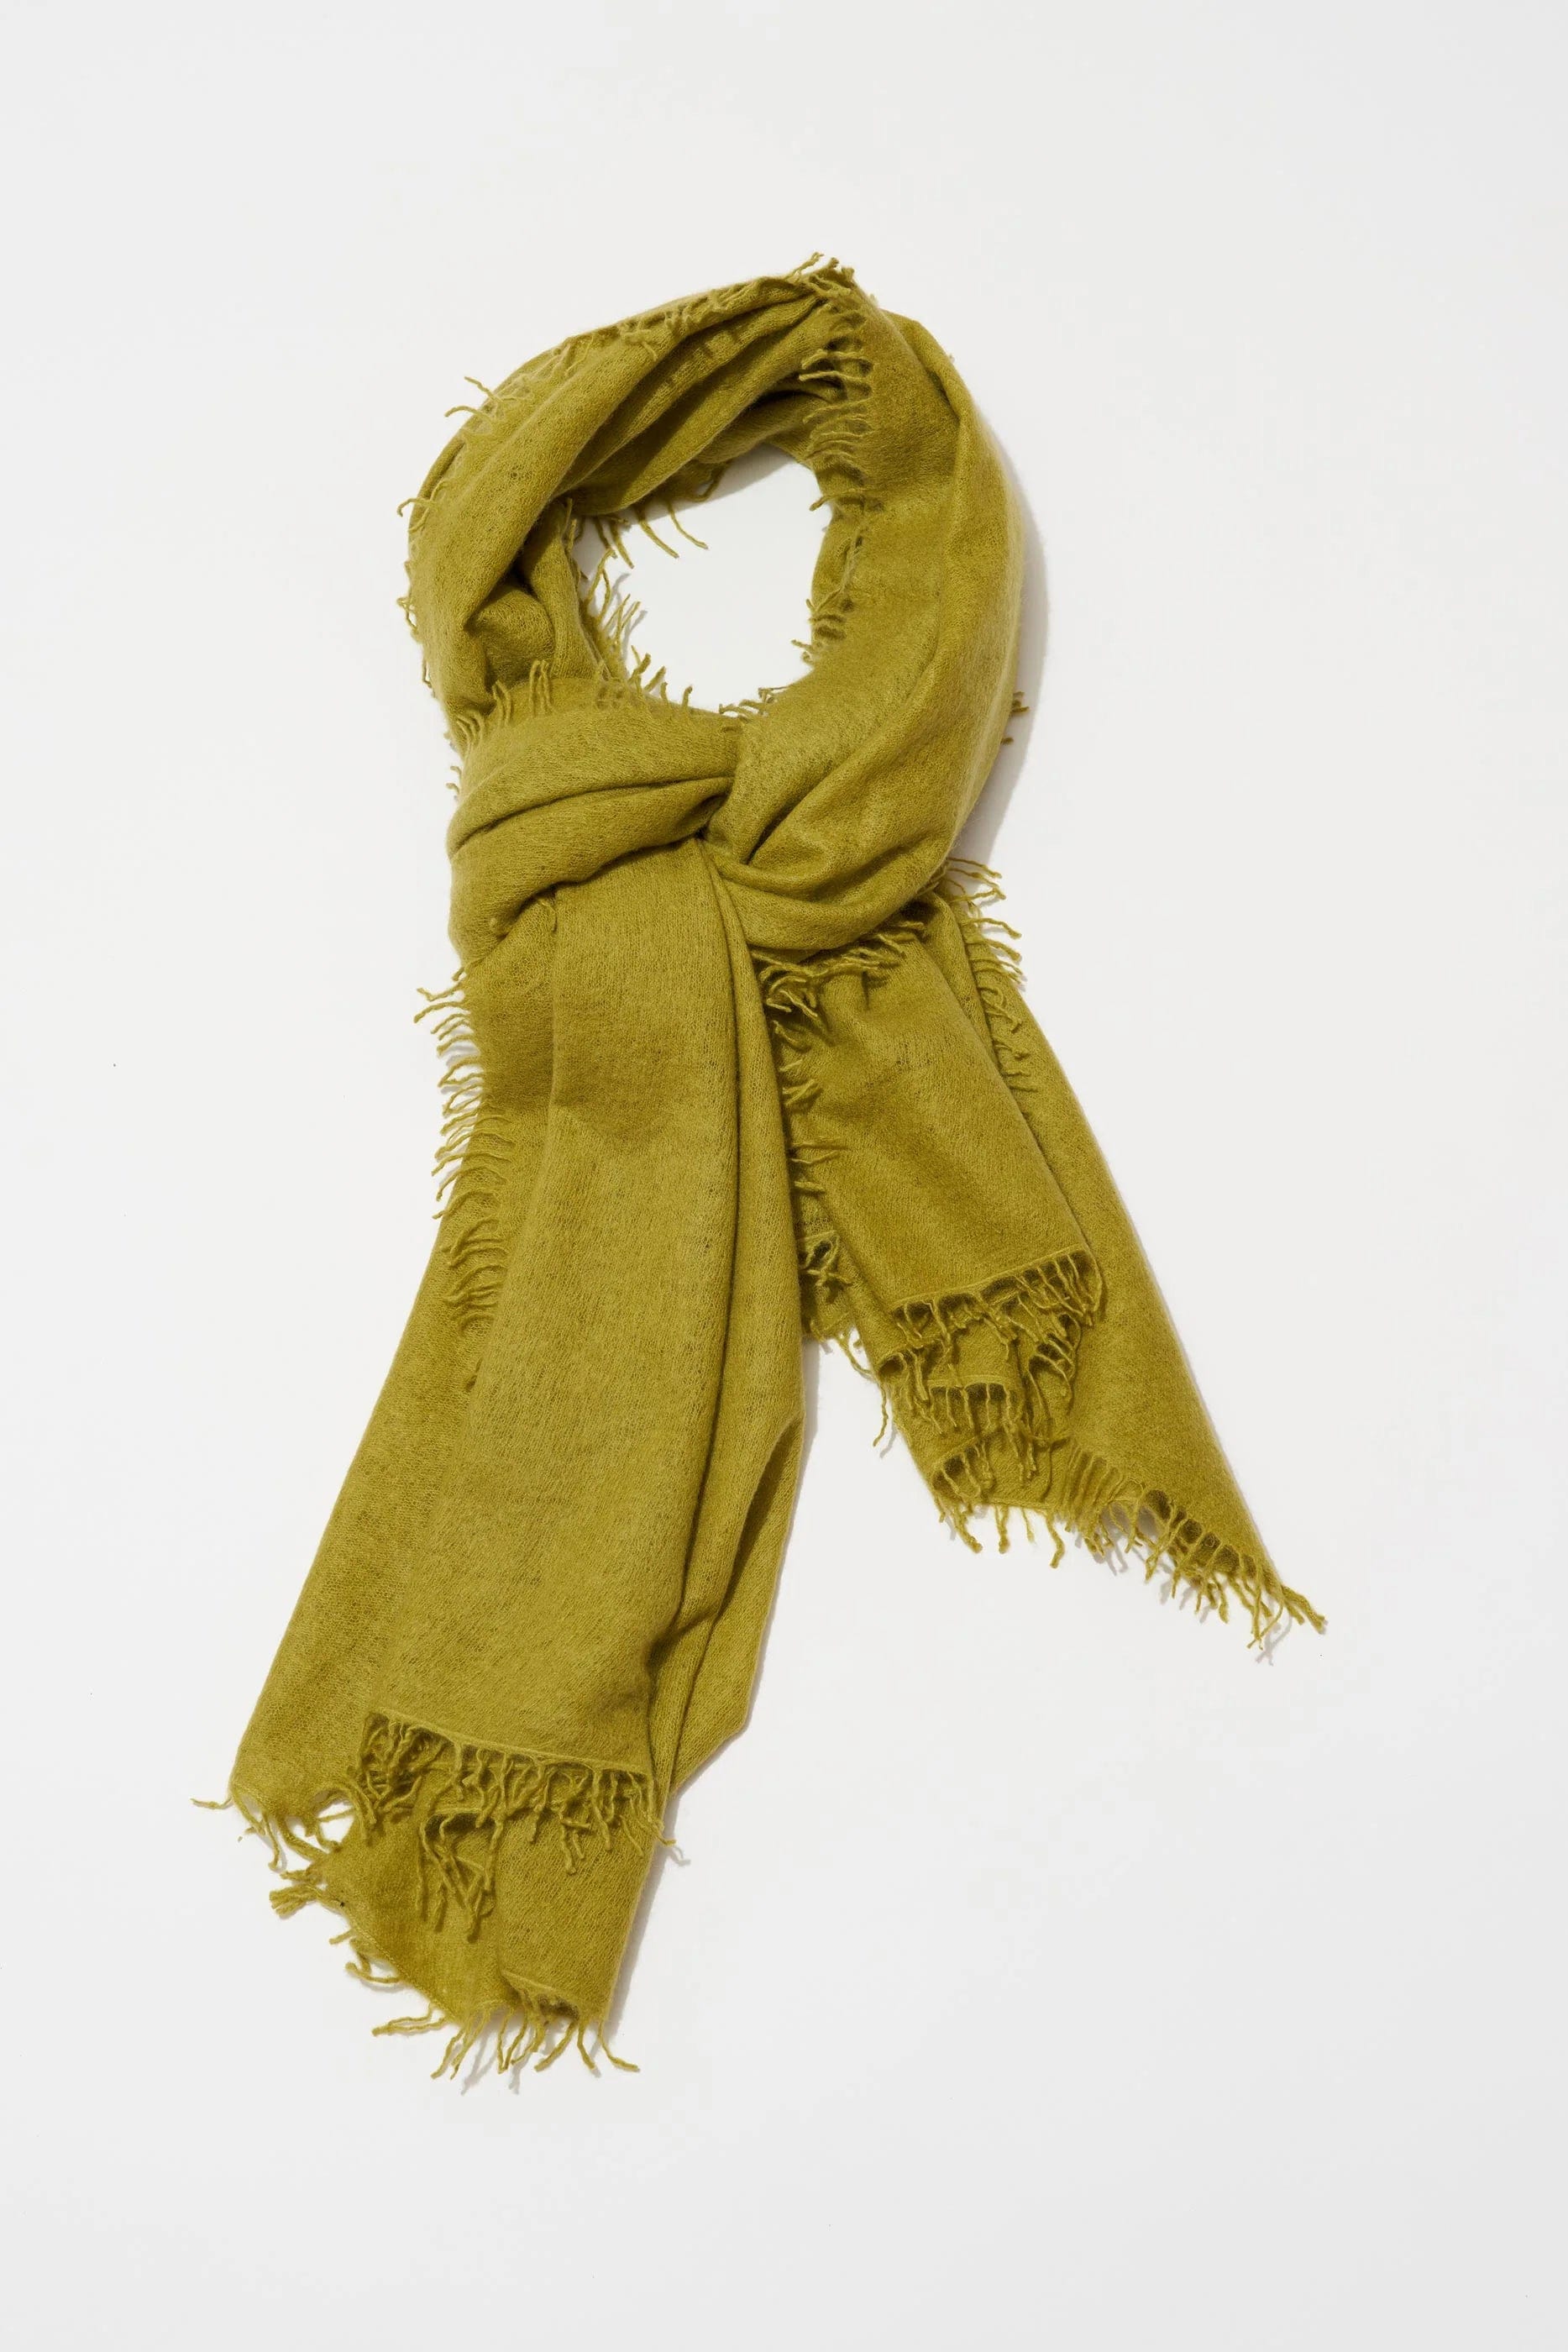 Organic John Patrick Accessories Lentil Sprout Organic by John Patrick - Cashmere Felted Scarf